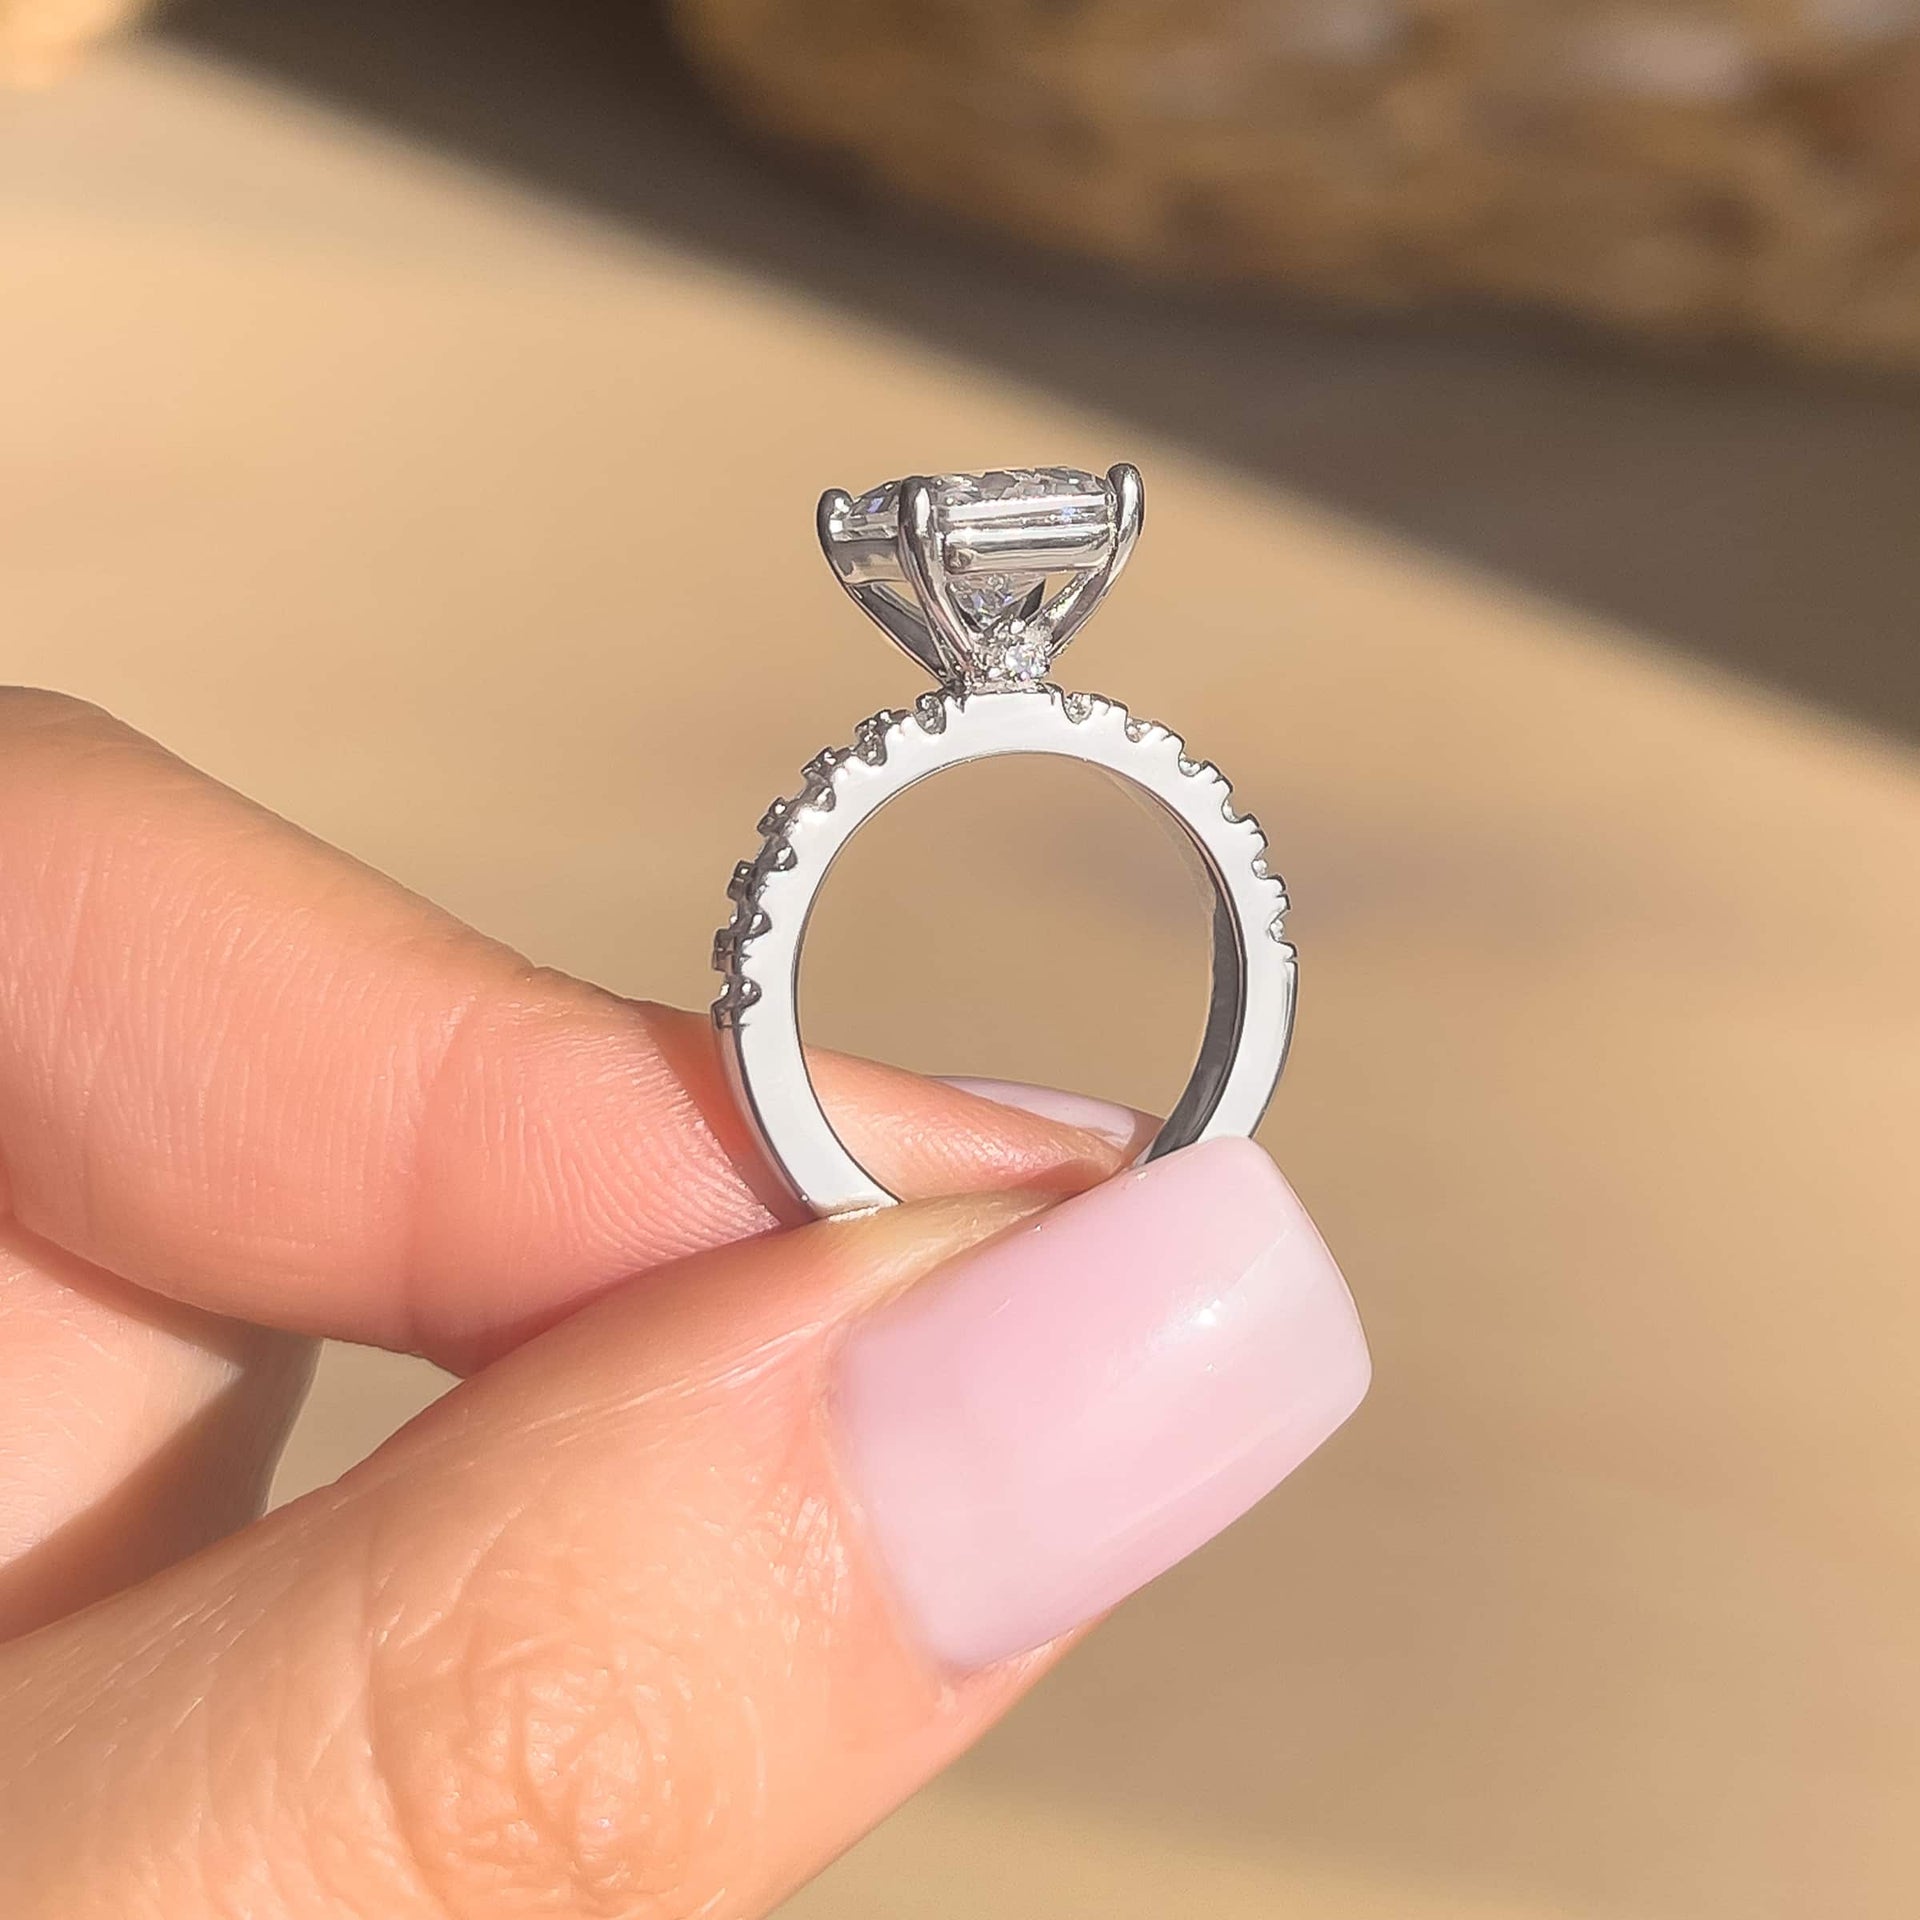 3.75 carat silver engagement ring setting shot shown in silver modeled on female with light pink nails and brown background